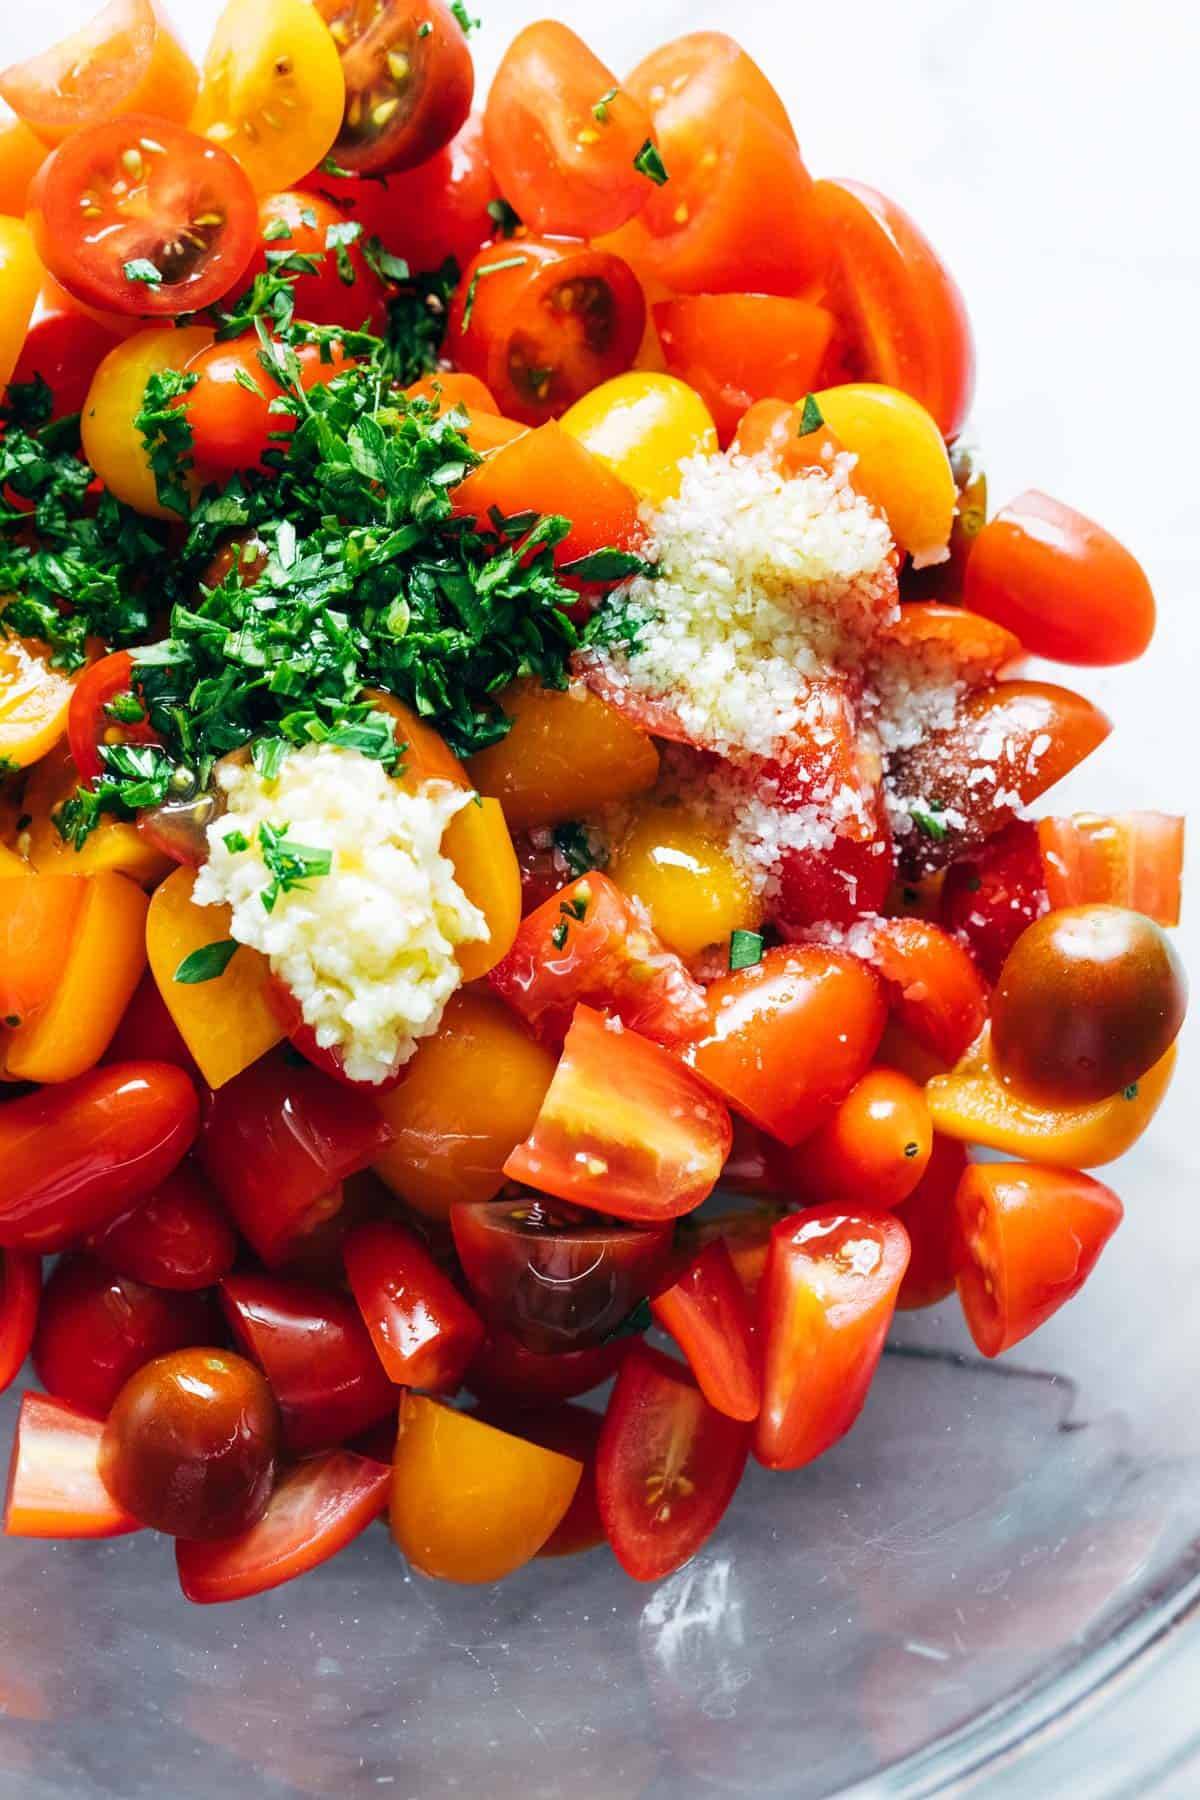 Ingredients for marinated tomatoes in a bowl.